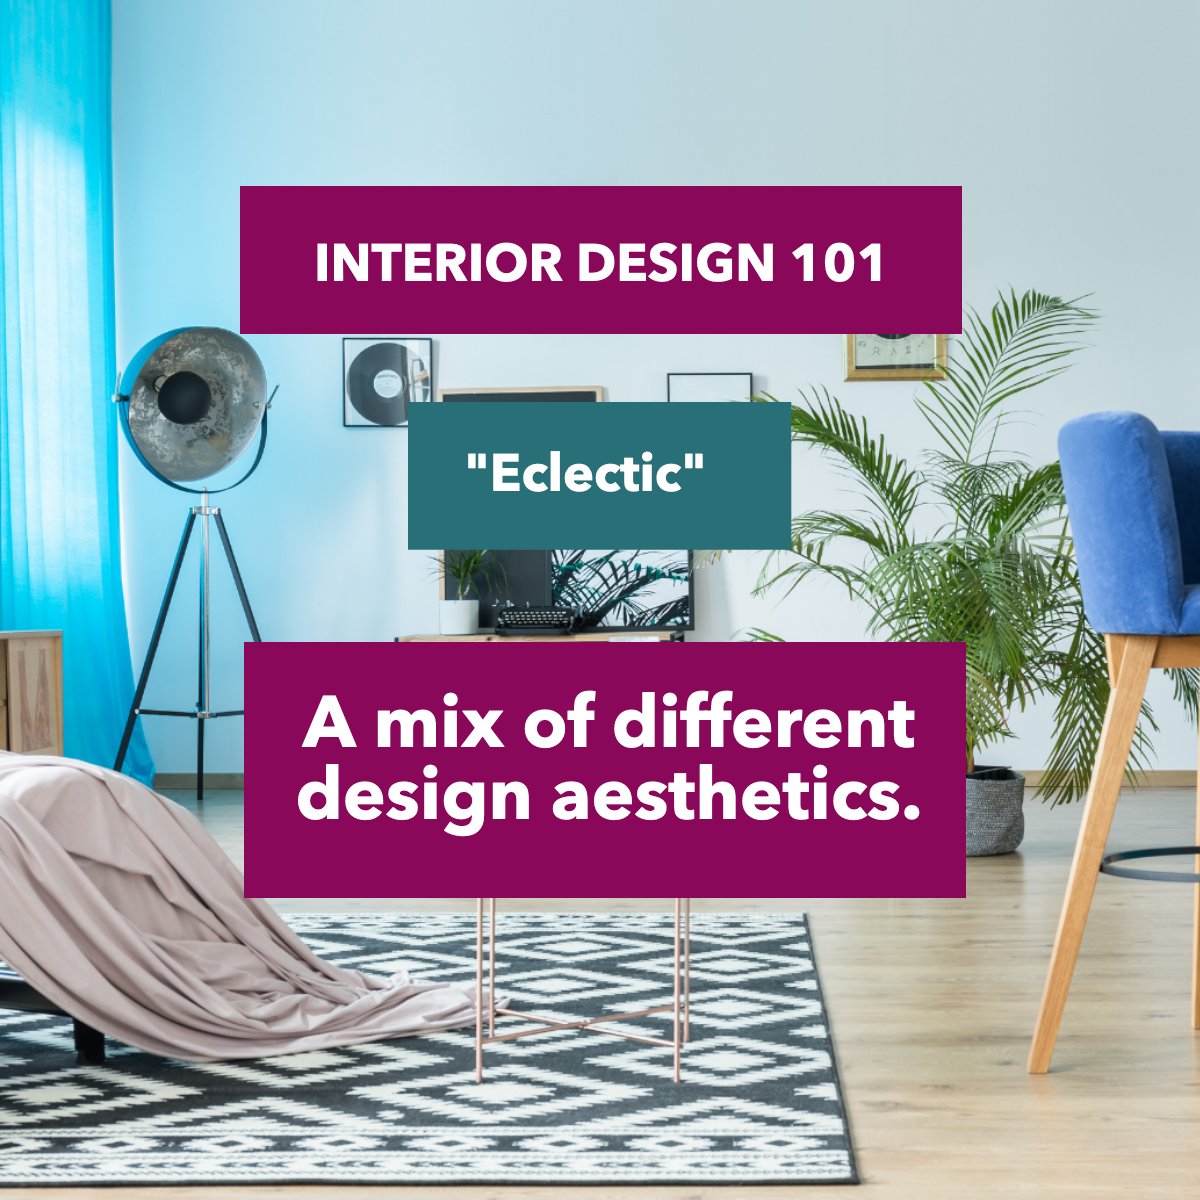 Interior Design 101

'Eclectic' 

A mix of different design aesthetics. 

#interiorsdesign    #interiortrends    #interiordesigning    #interiordesigntrends    #interiorsaddict    #interiordesigntips    #interiordesigngoals 
#HomeSoldByDawn #WestChesterRealtor